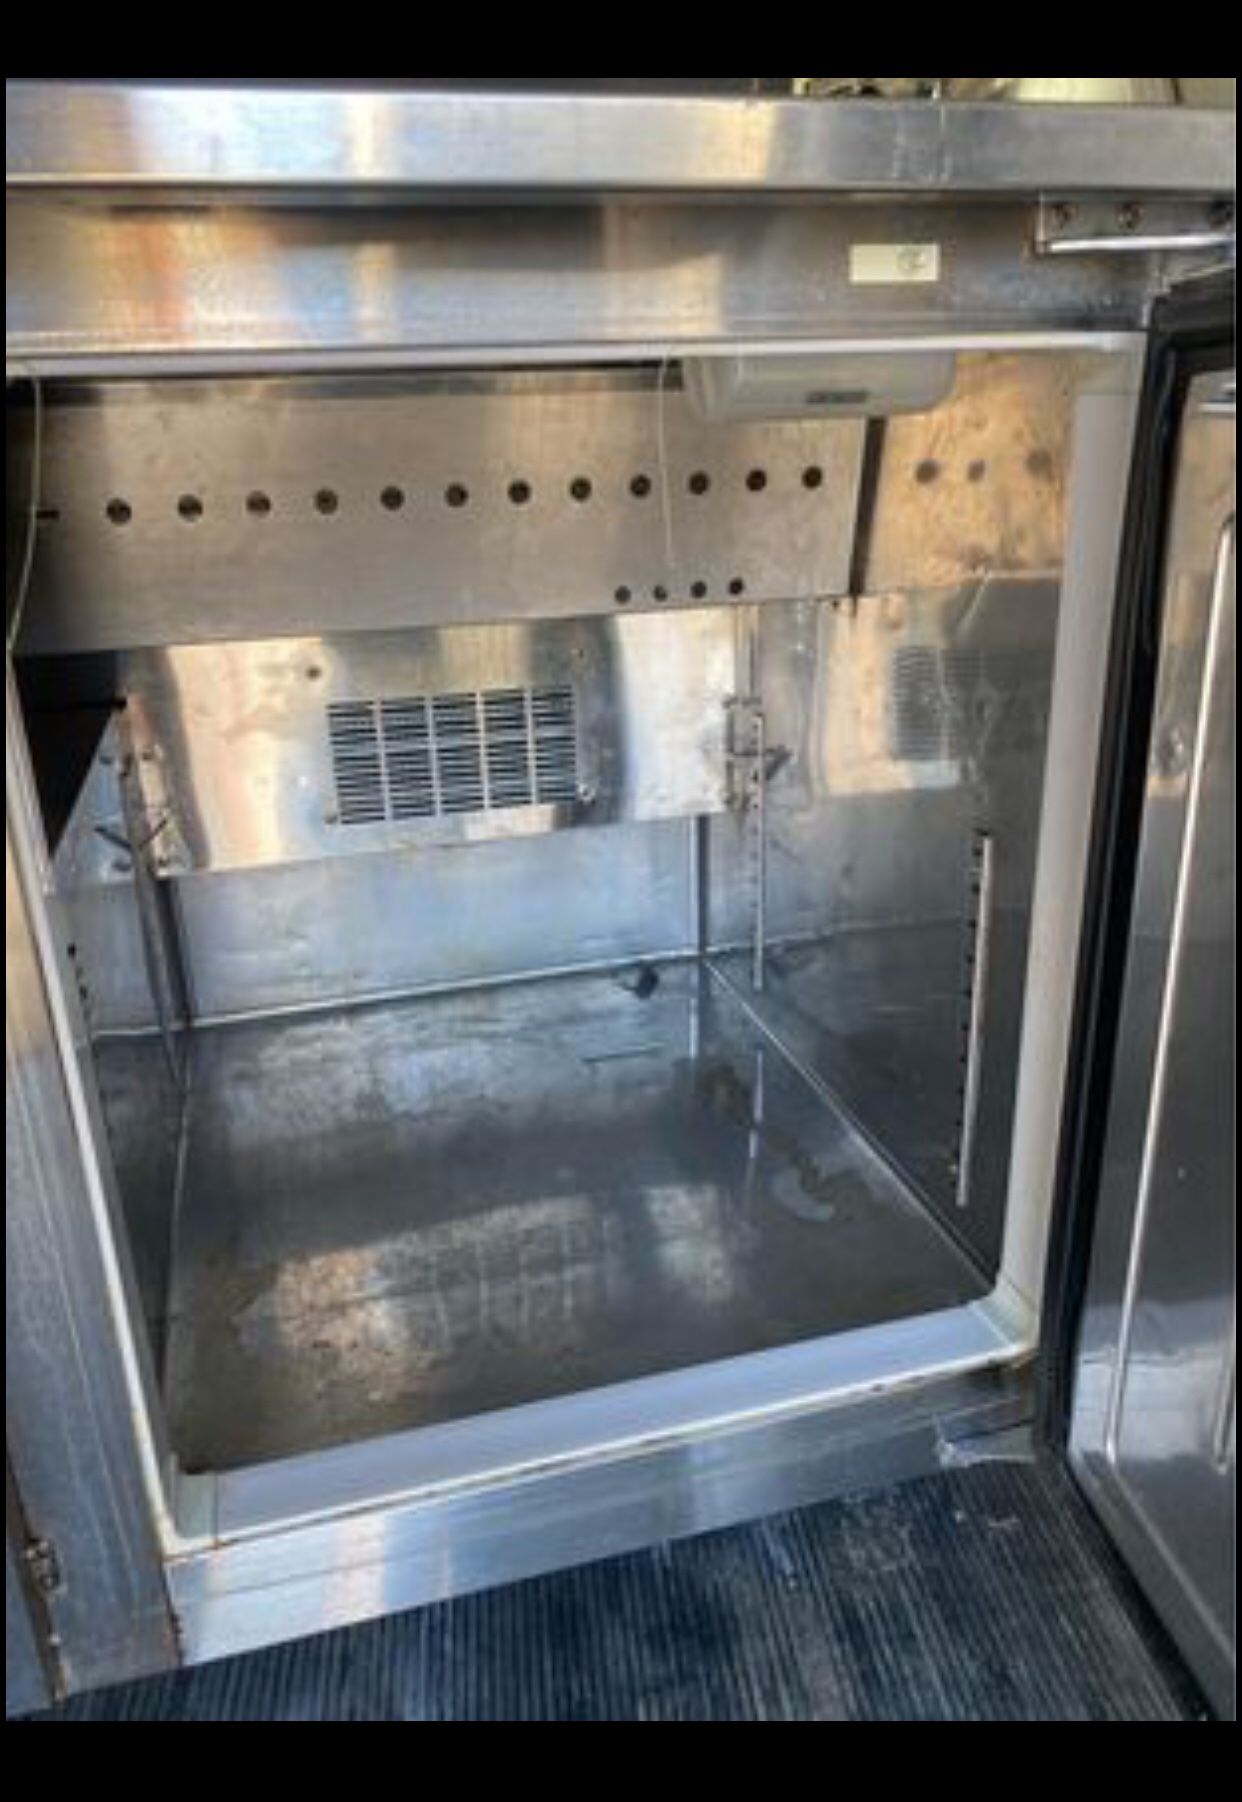 On sale comercial everest refrigerator is in good conditions $$$780 dollars in oakland 